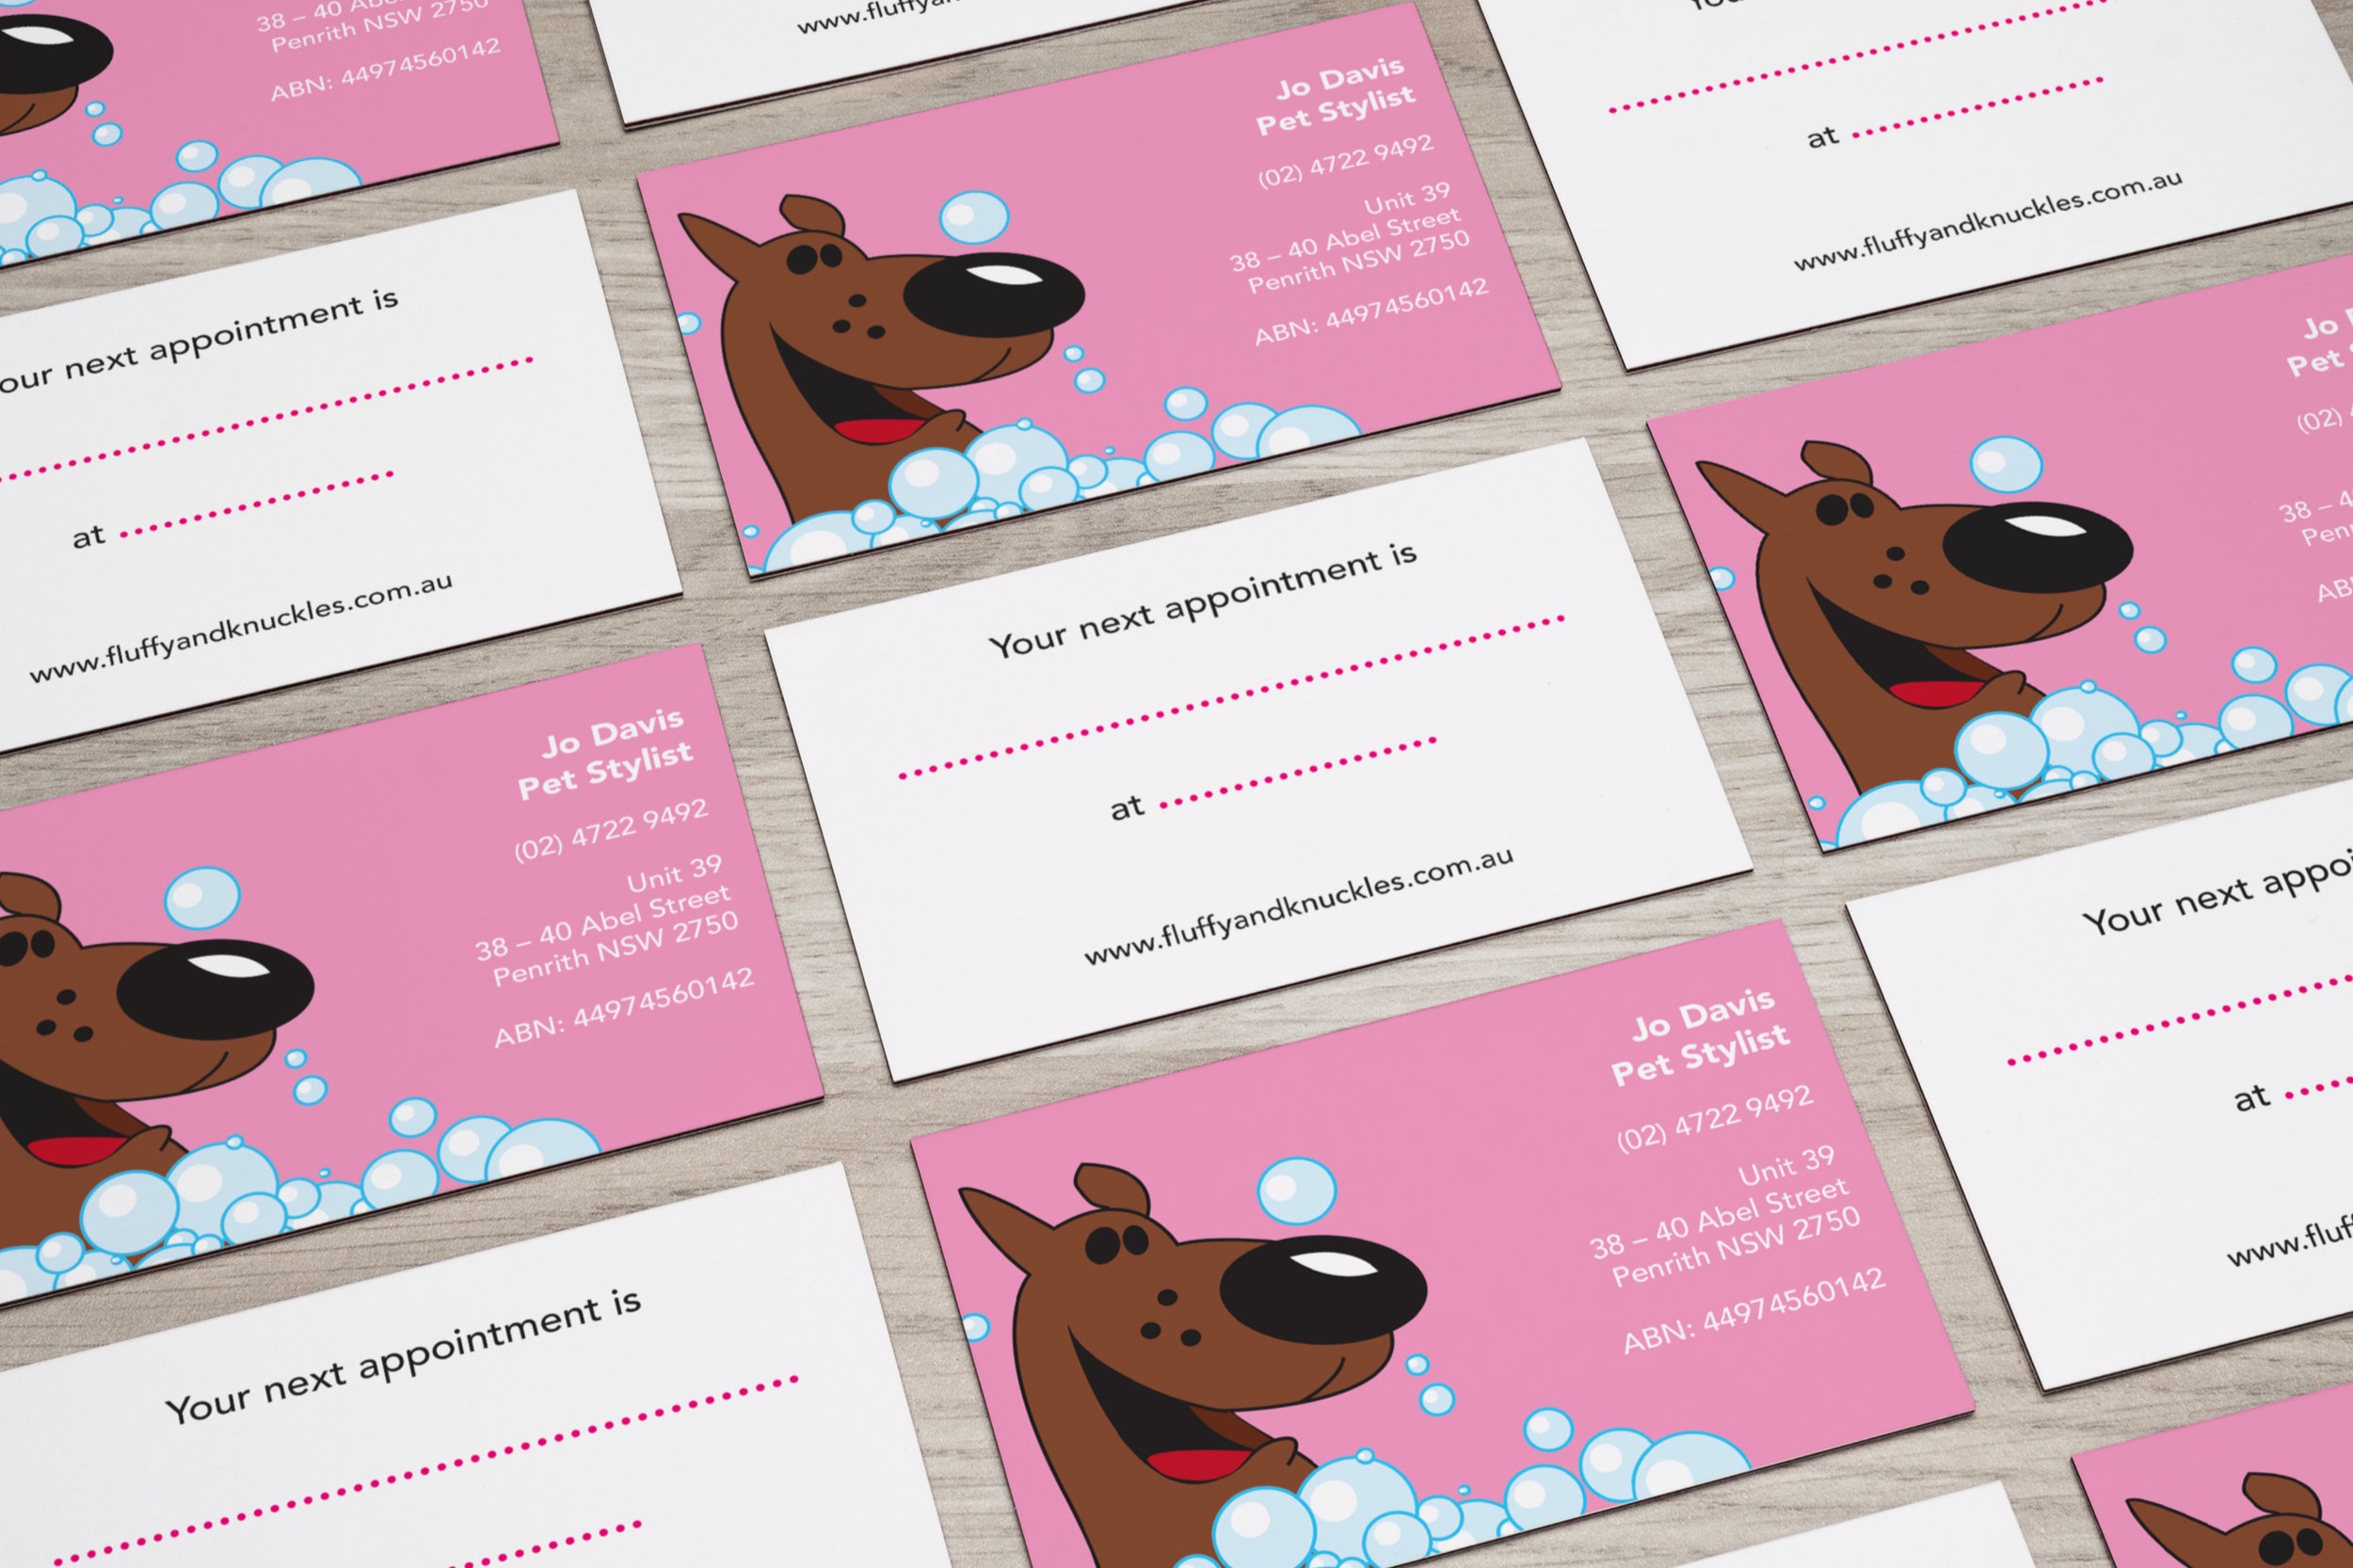 Business card design – Fluffy and Knuckles